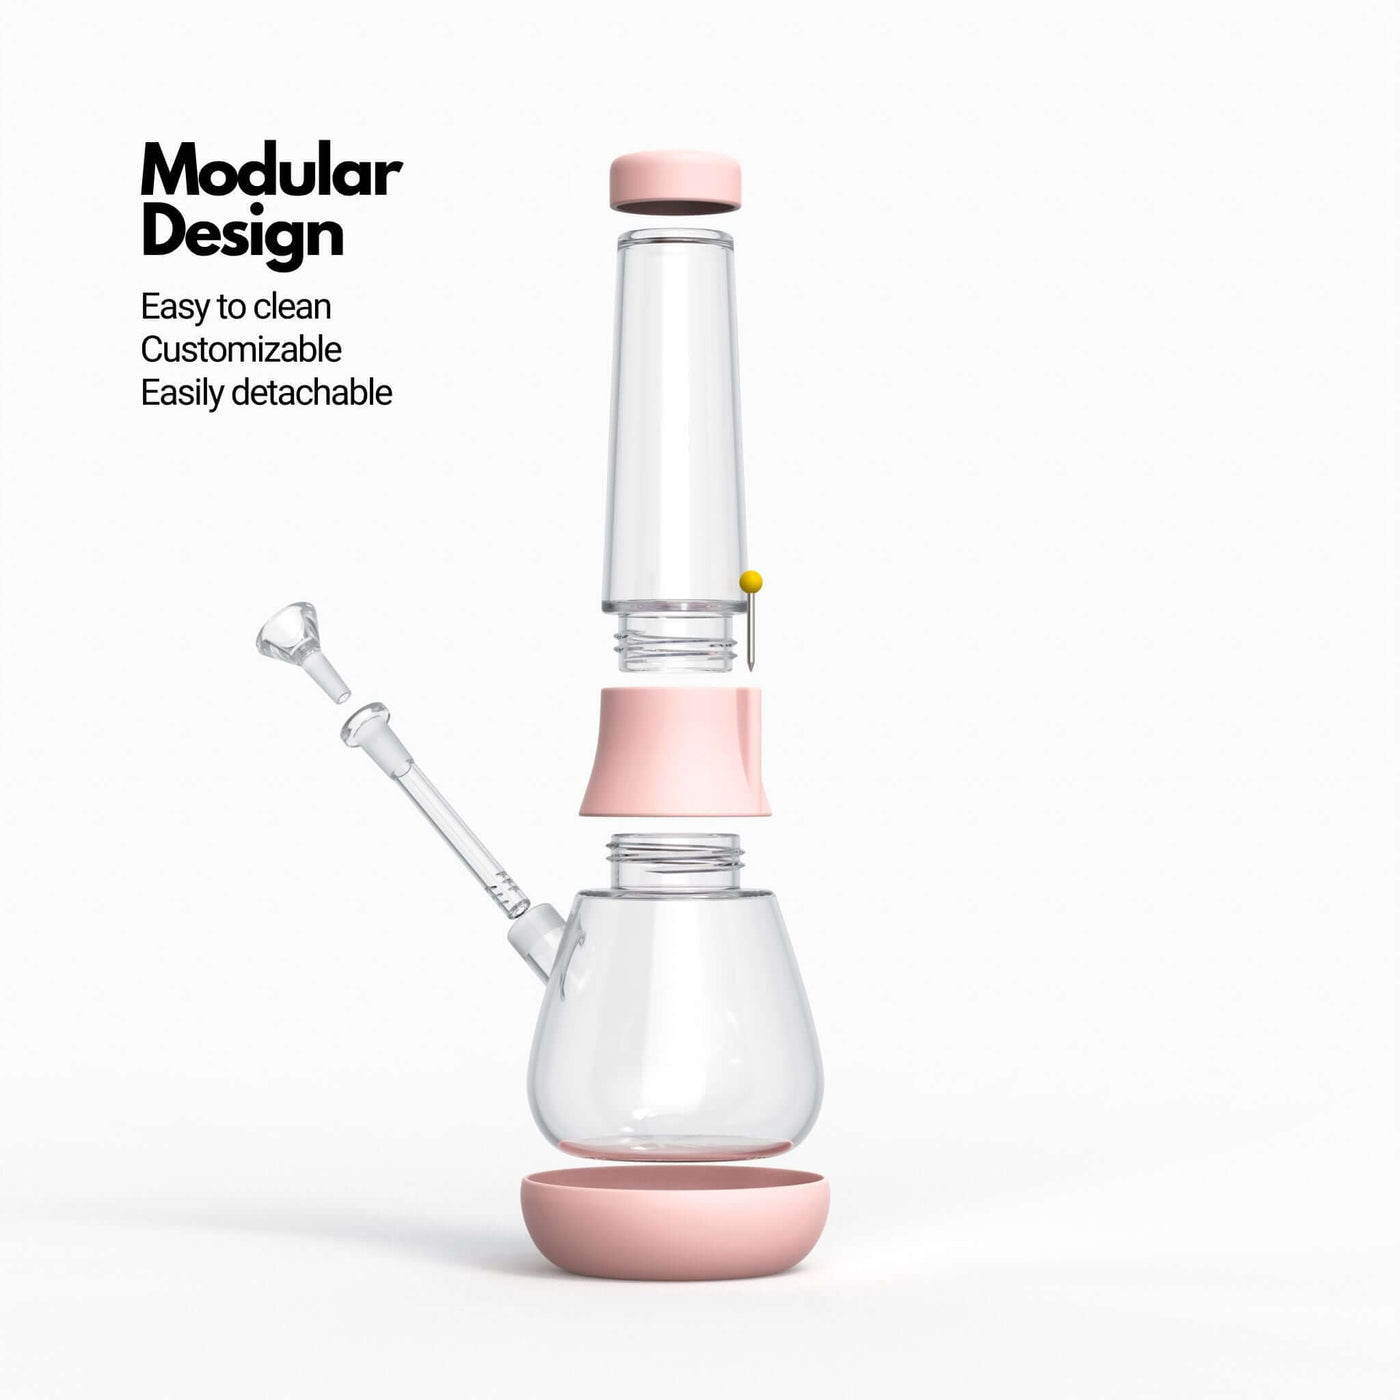 Exploded view of glass modular bong in baby pink, highlighting the stress-free cleaning and custom bong creation features